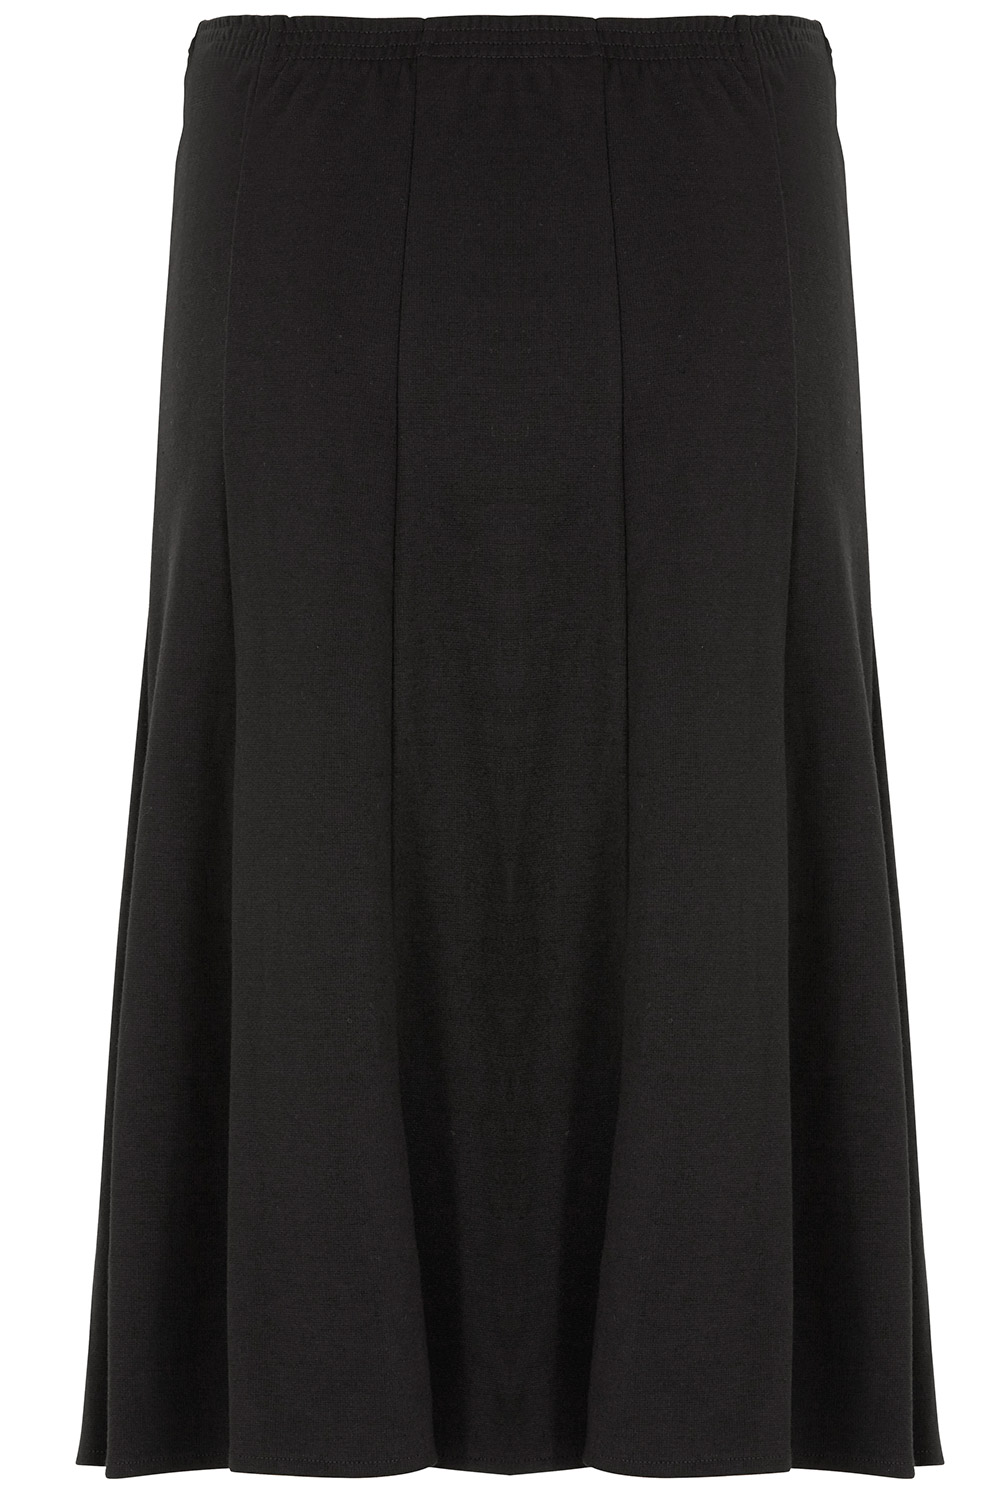 Elasticated Waist Ponte Panel Skirt | Home Delivery | Bonmarché